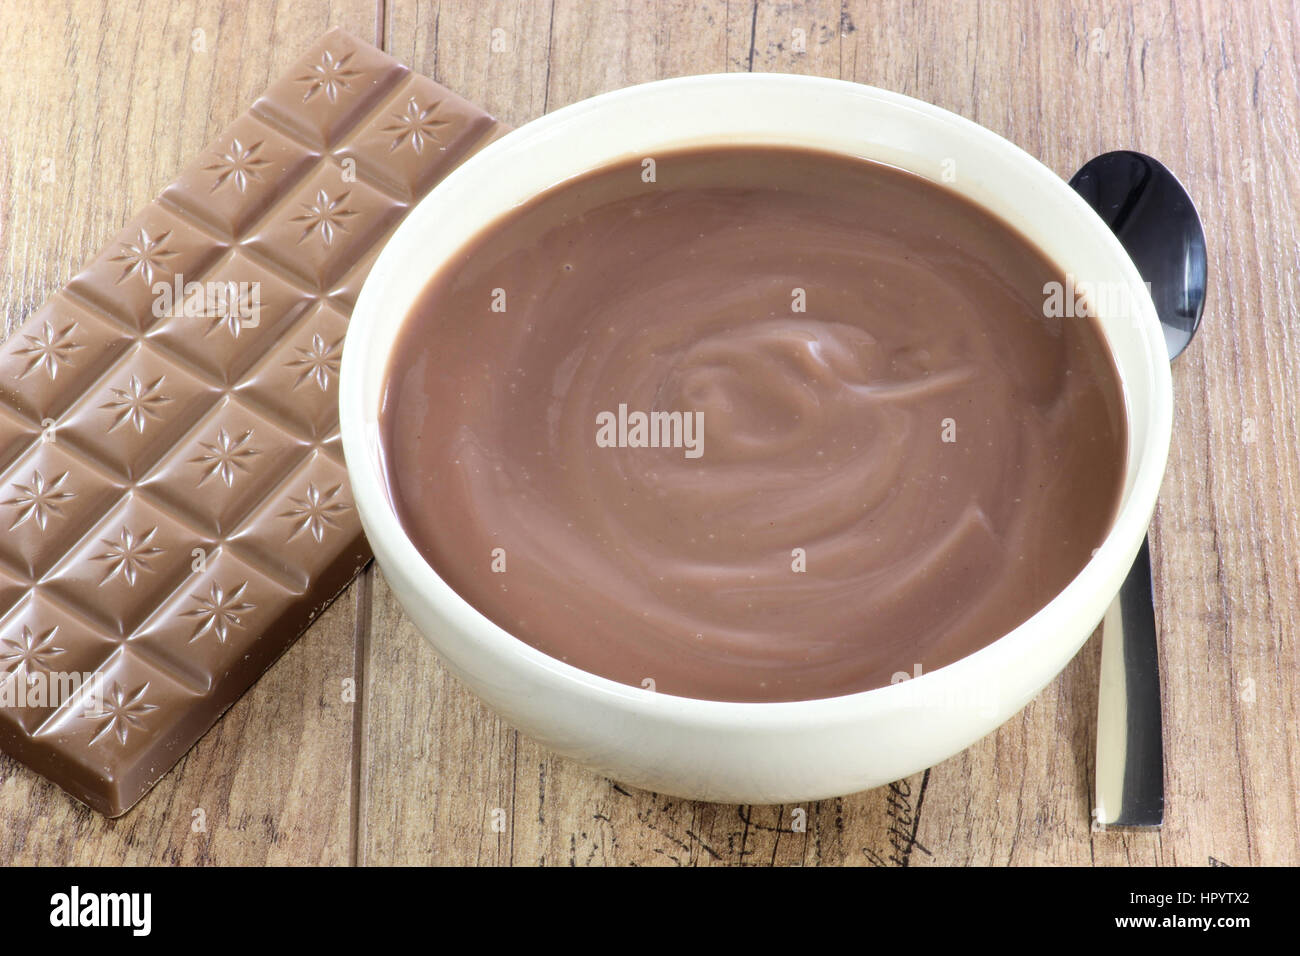 chocolate pudding in a bowl on wooden background Stock Photo